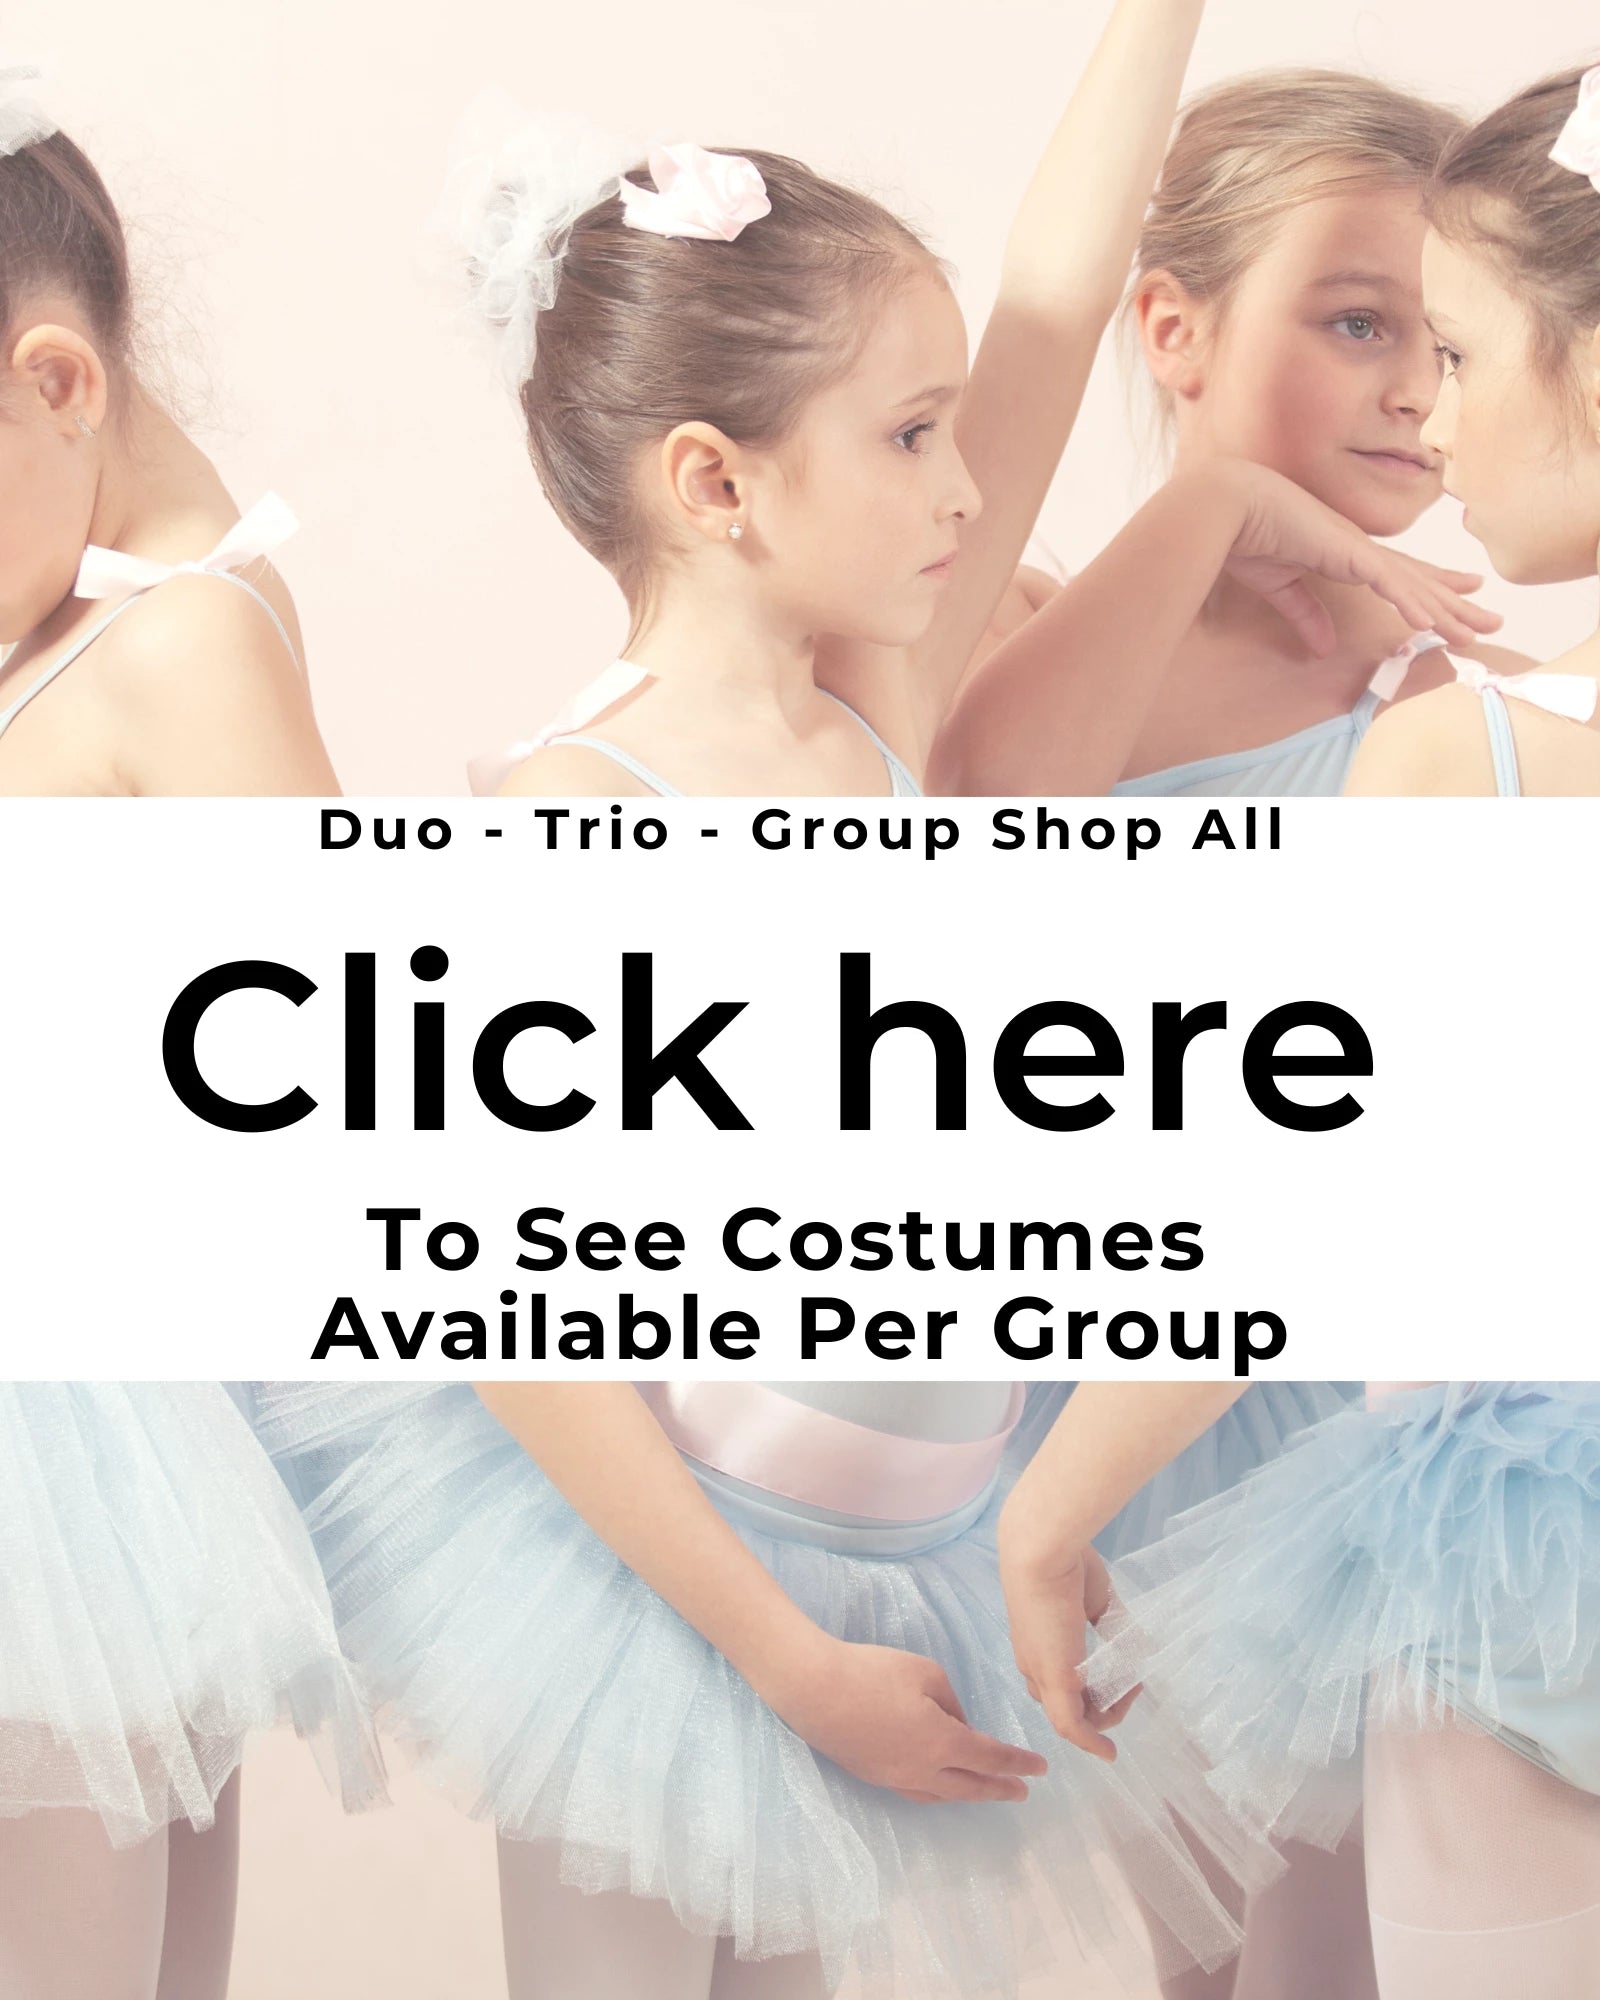 1. Duo Trio Group Shop All